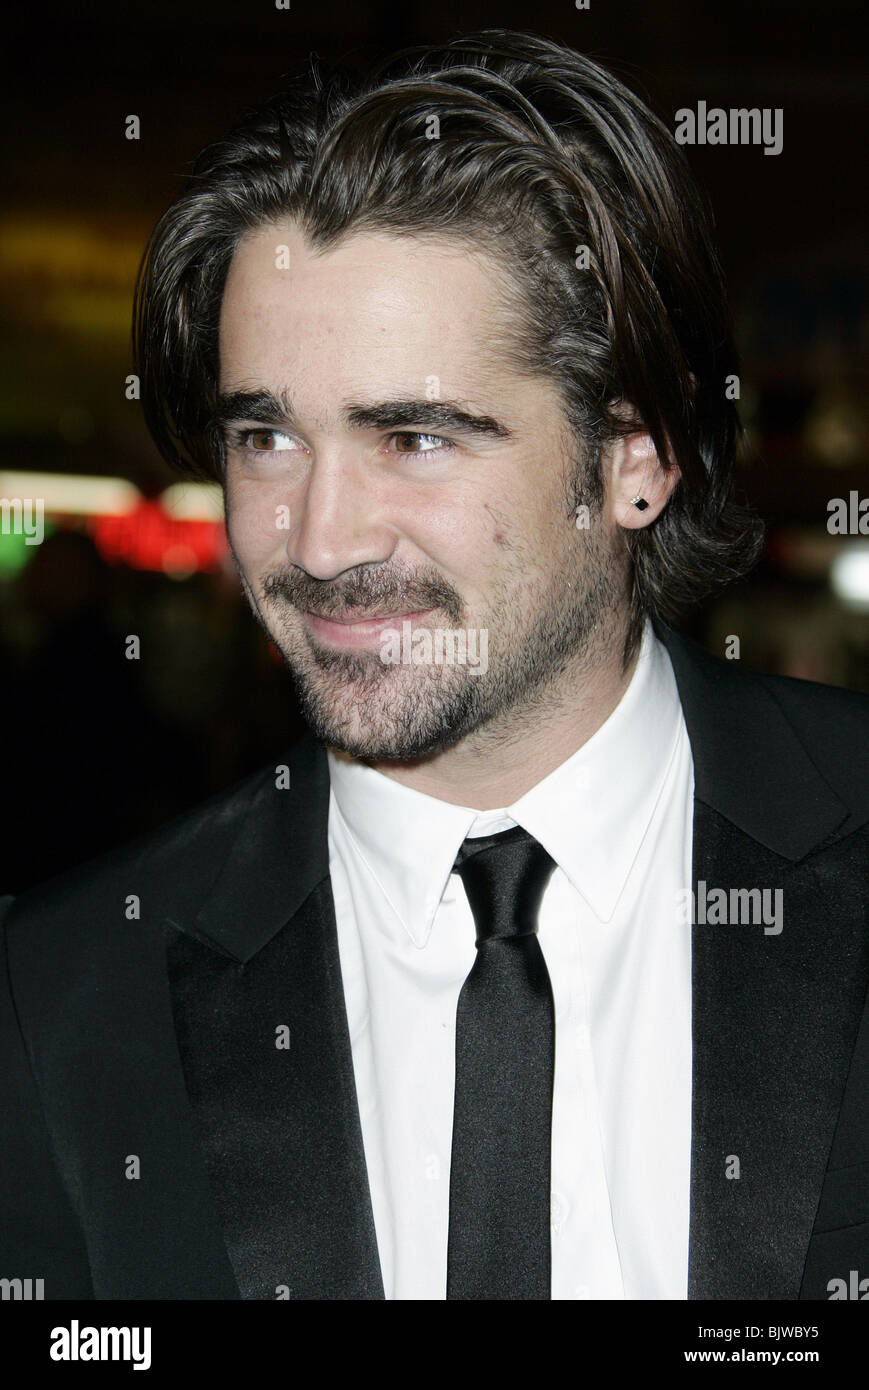 COLIN FARRELL ALEXANDER WORLD PREMIERE GRUMANN'S CHINESE THEATRE HOLLYWOOD LOS ANGELES USA 16 November 2004 Stock Photo